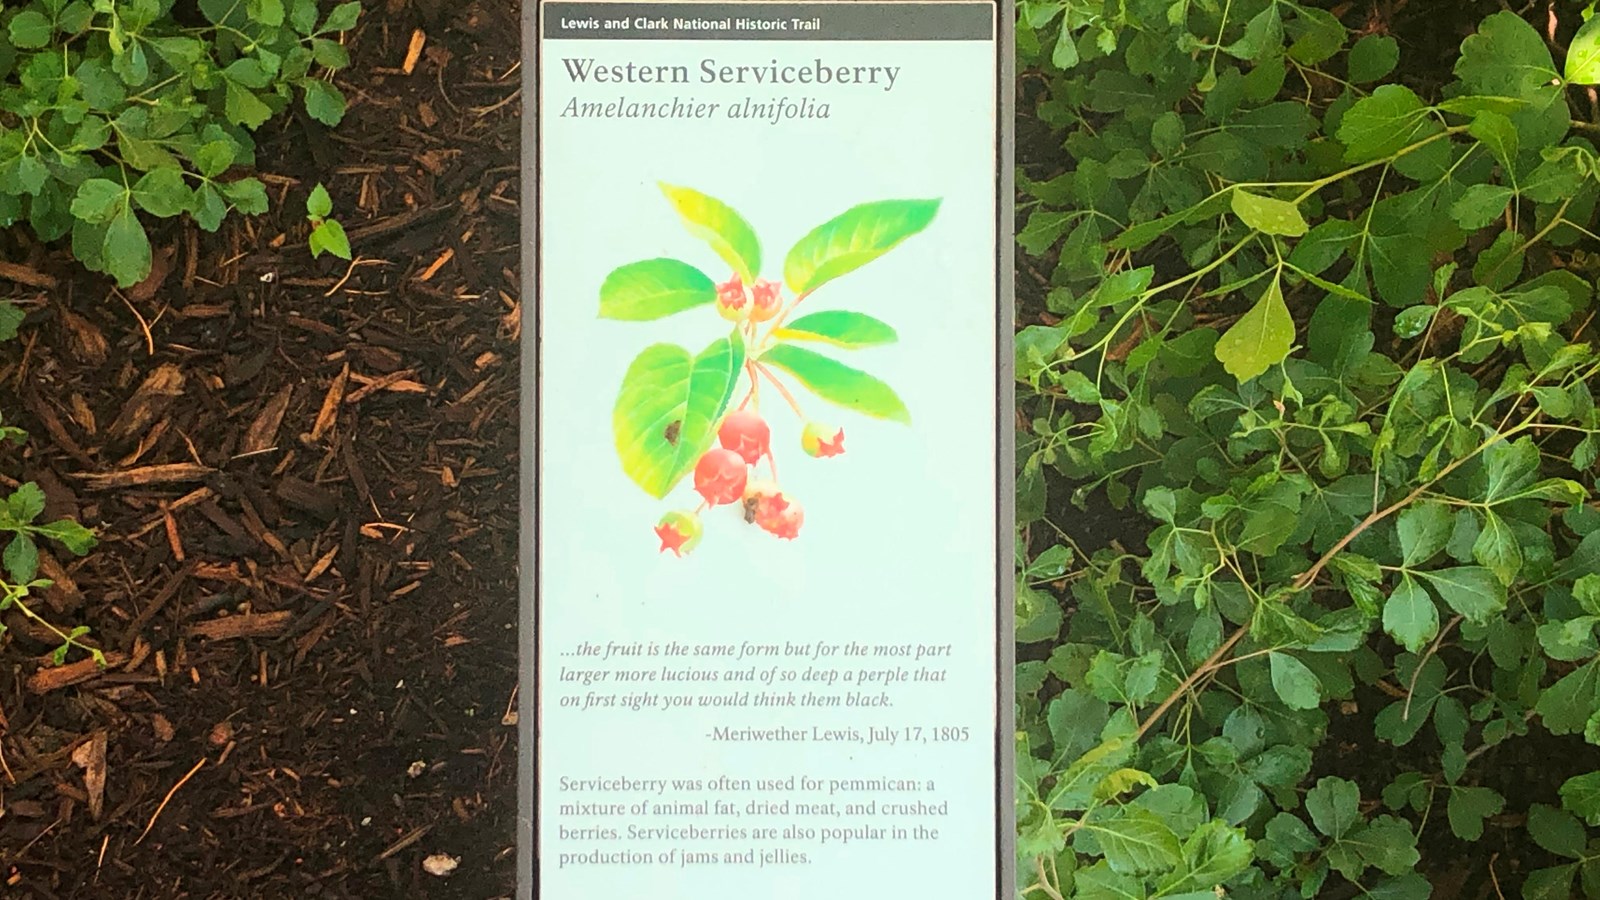 A small sign is placed near a green plant. The sign describes the Western Serviceberry.